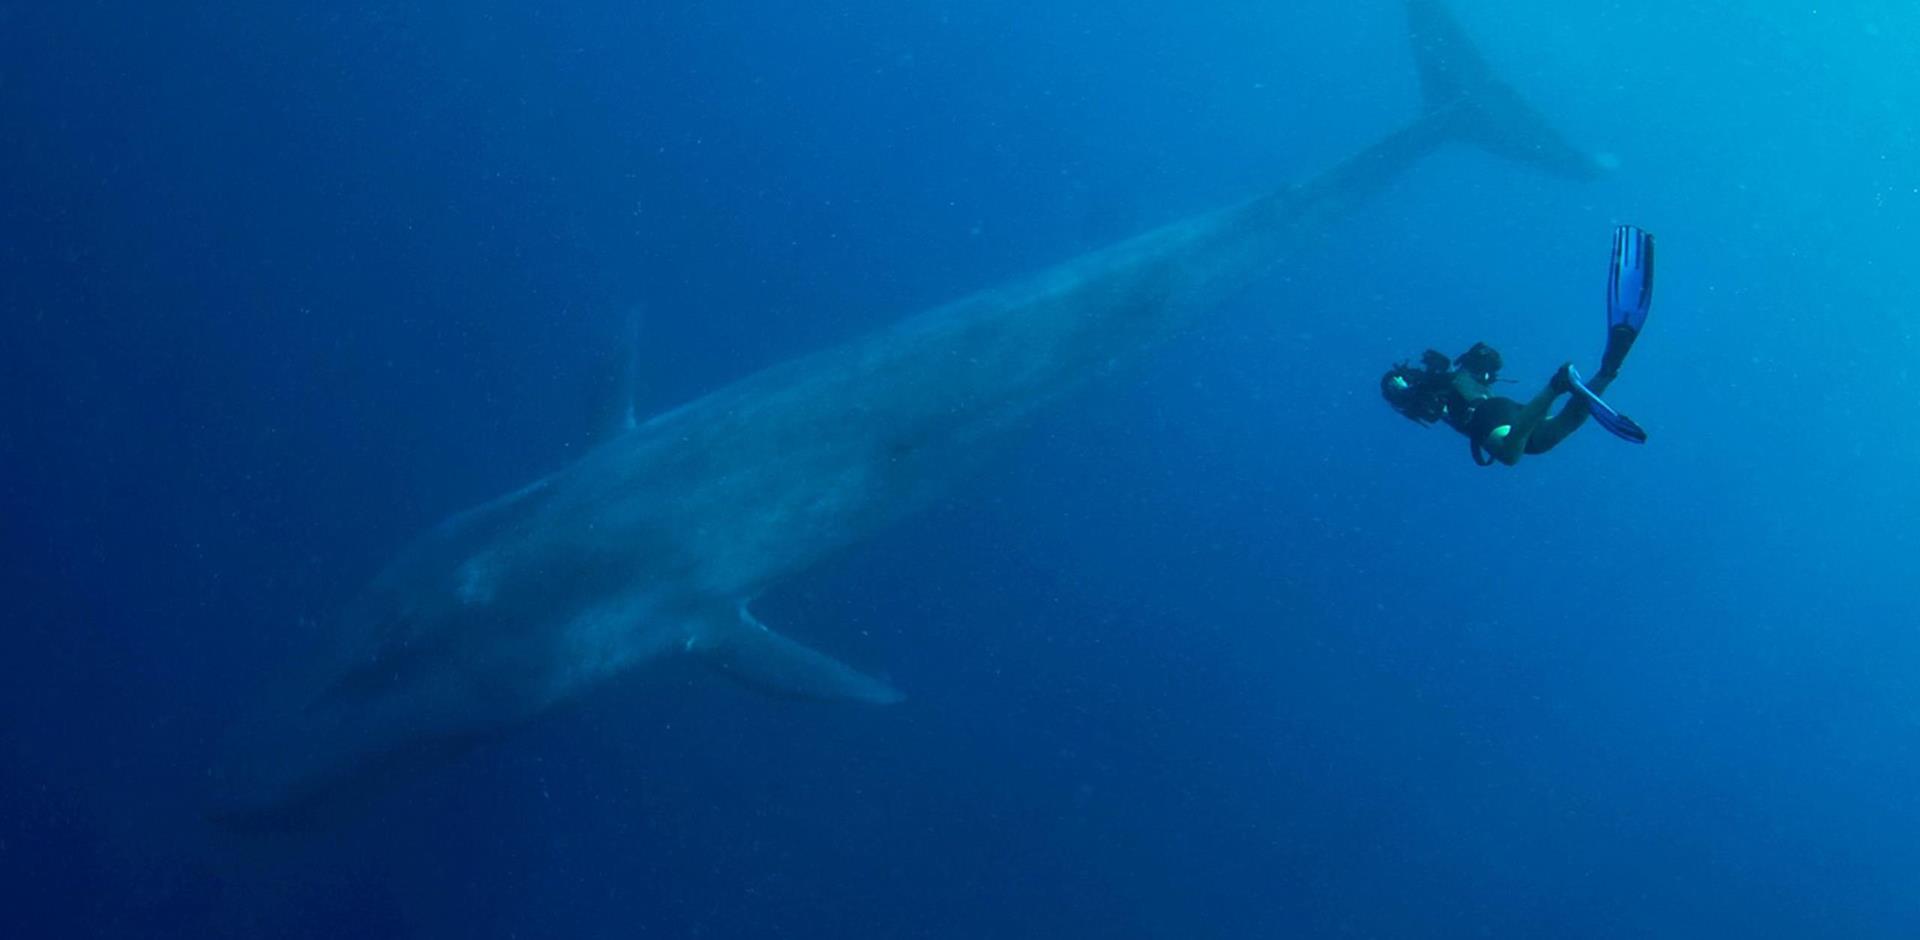 A&K Sri Lanka experience: Photograph the blue whale underwater